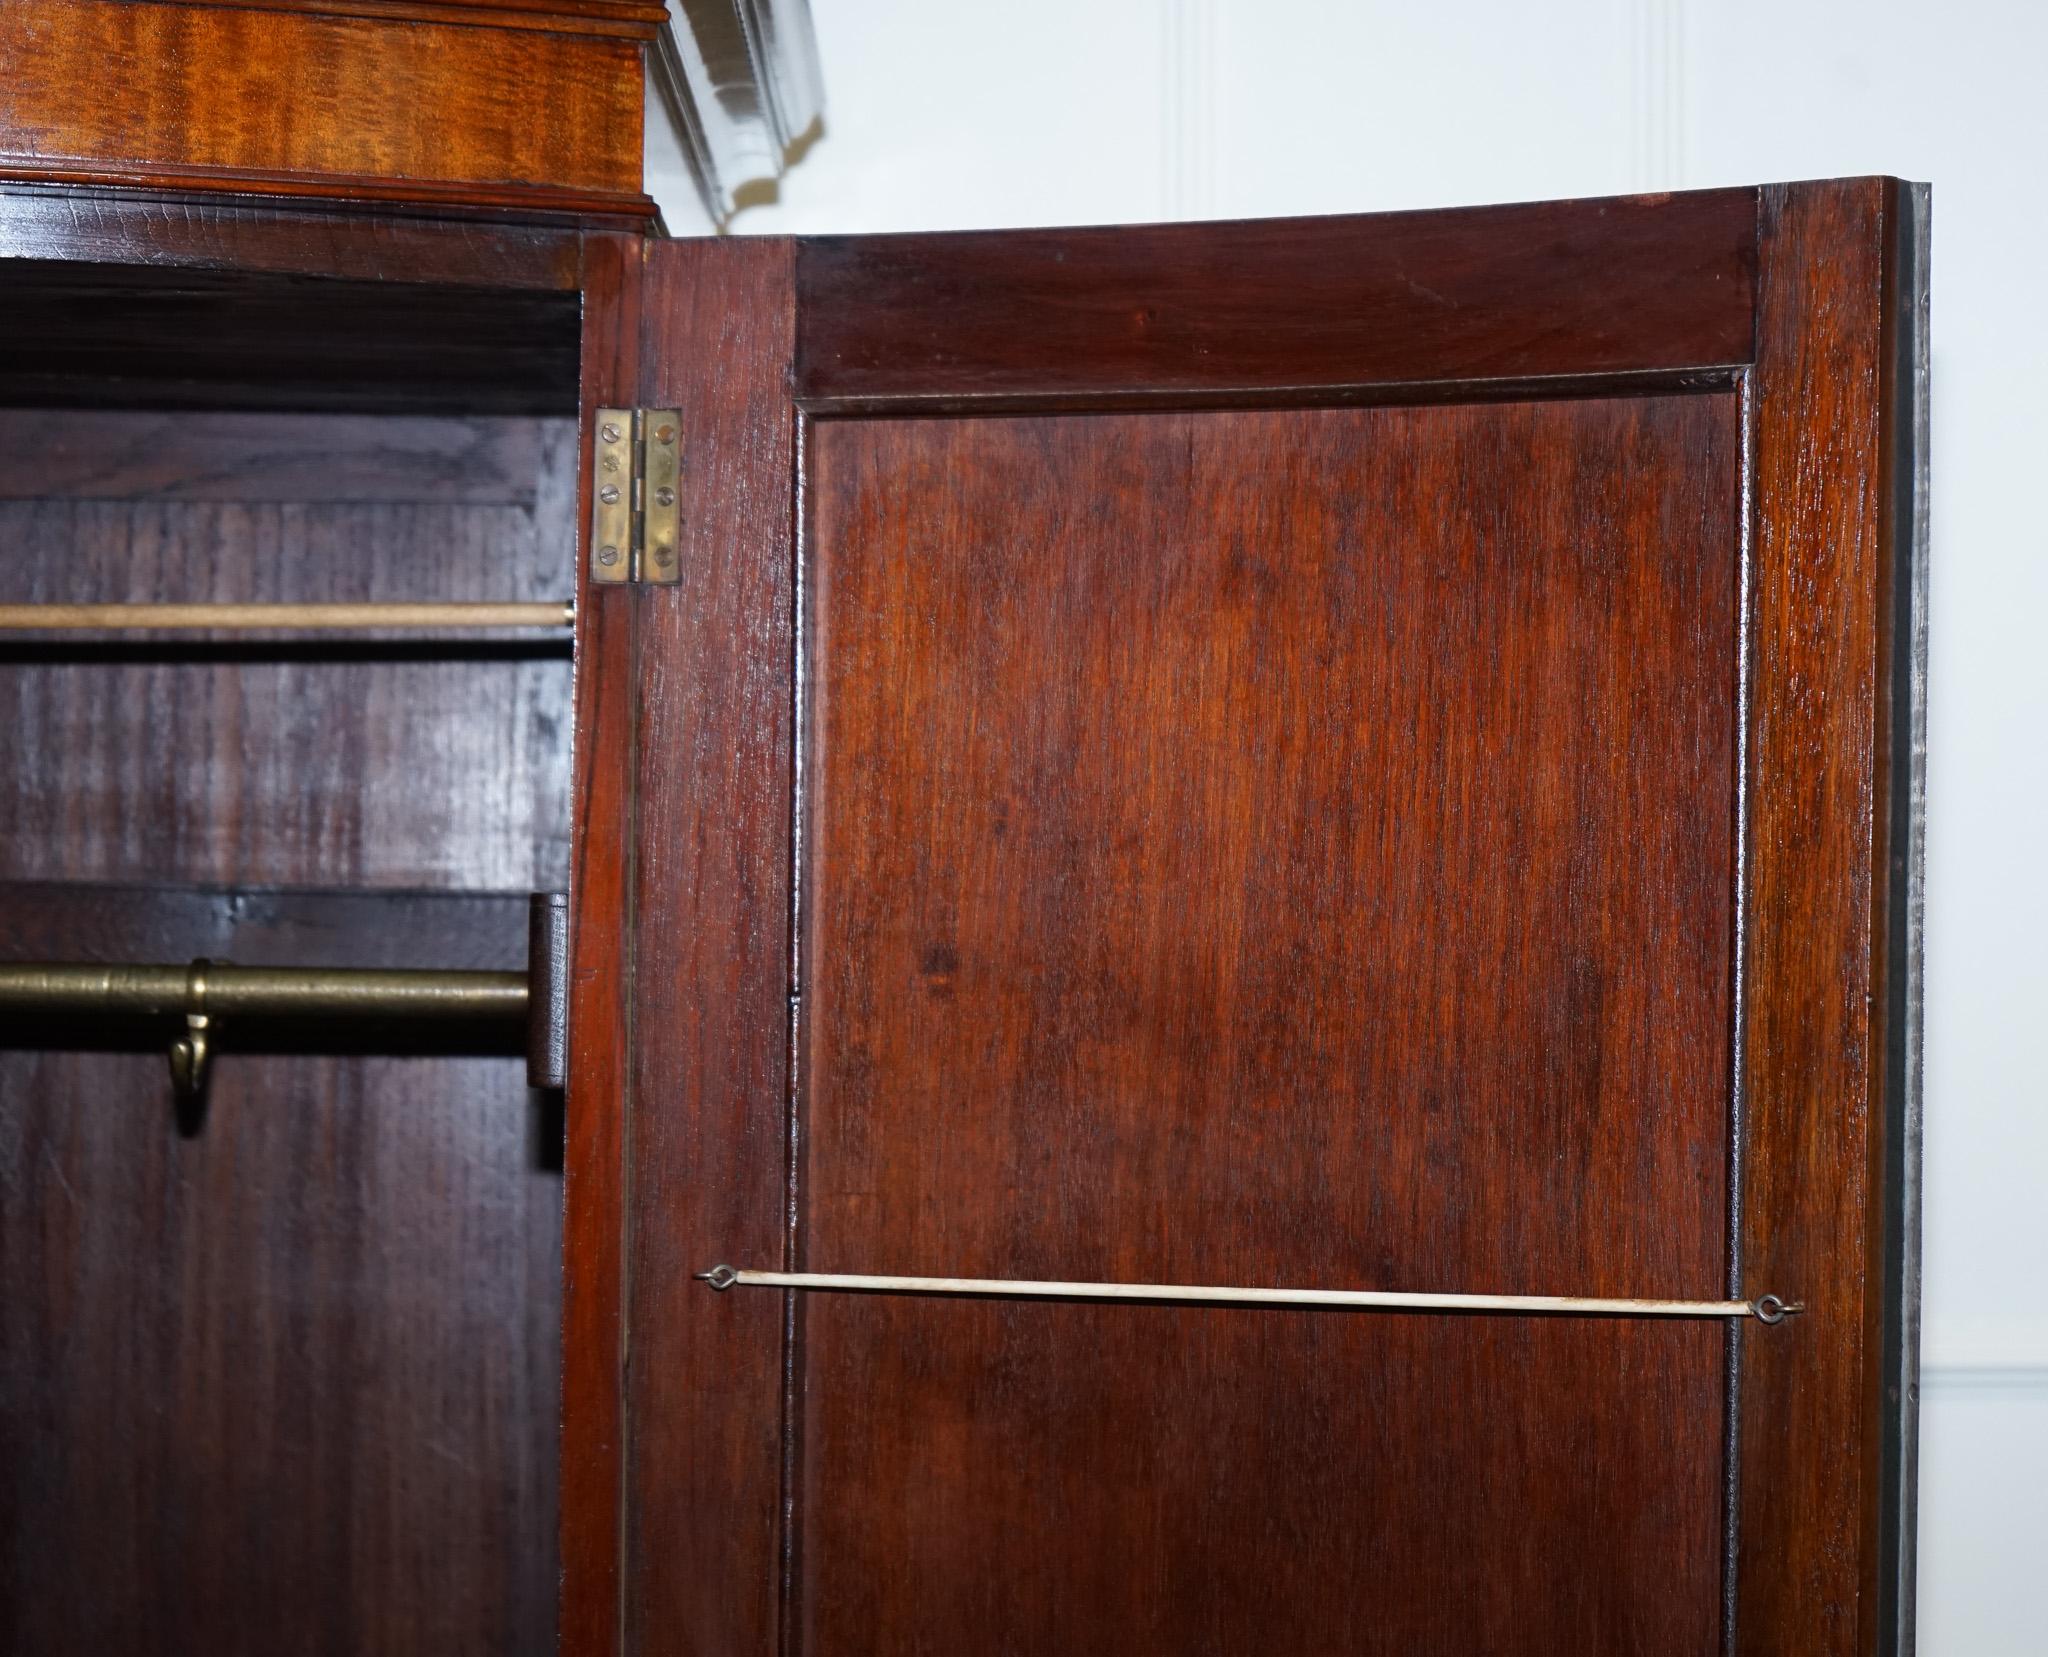 Hand-Crafted Beautiful Edwardian 1900s Bow Fronted Two Door Wardrobe with Brass Lining